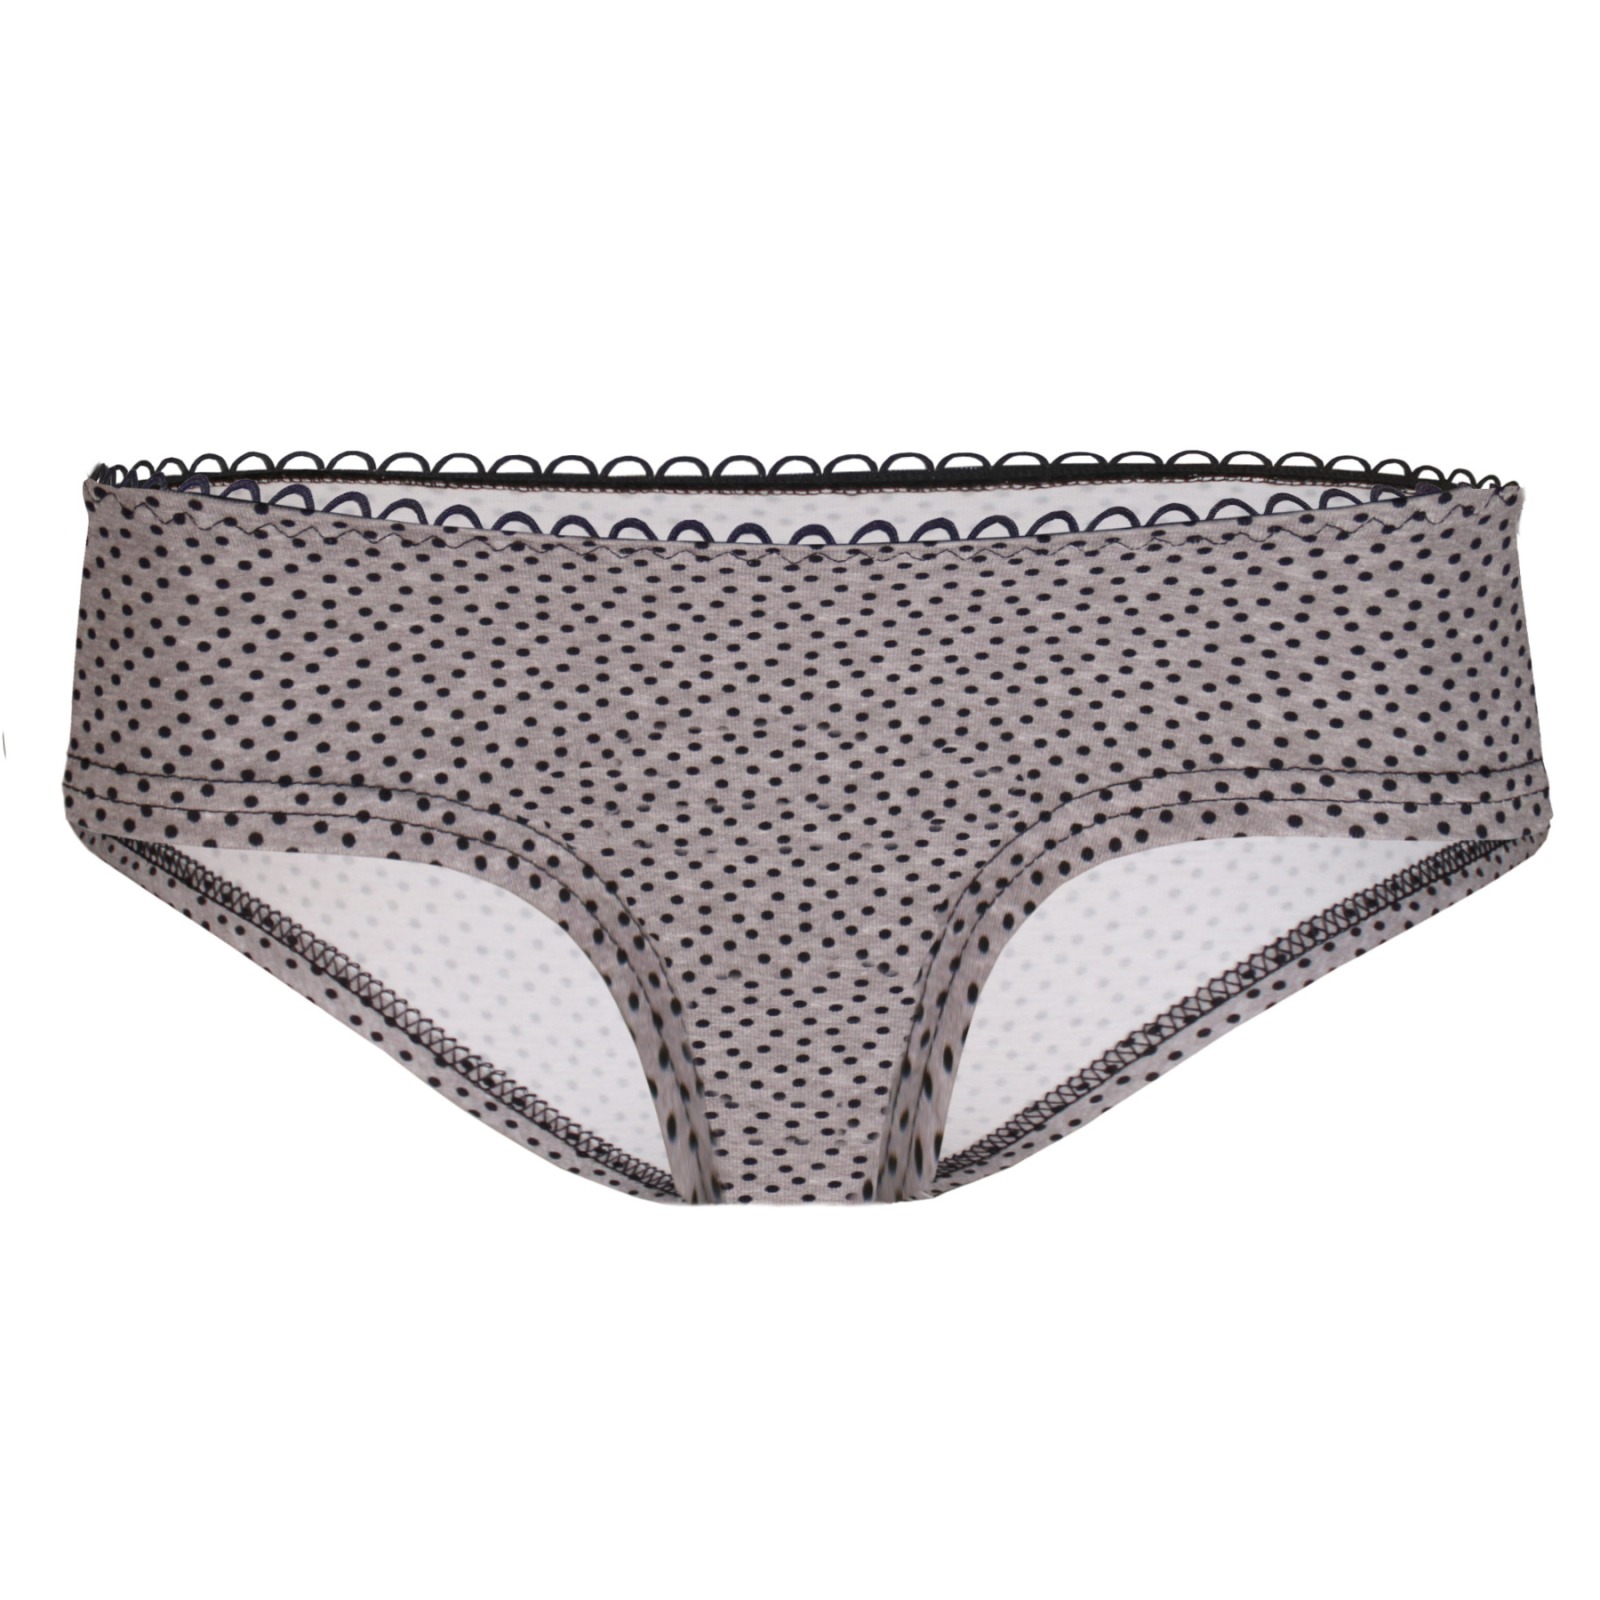 Bio hipster panties Muster dotted tinged in grey grey